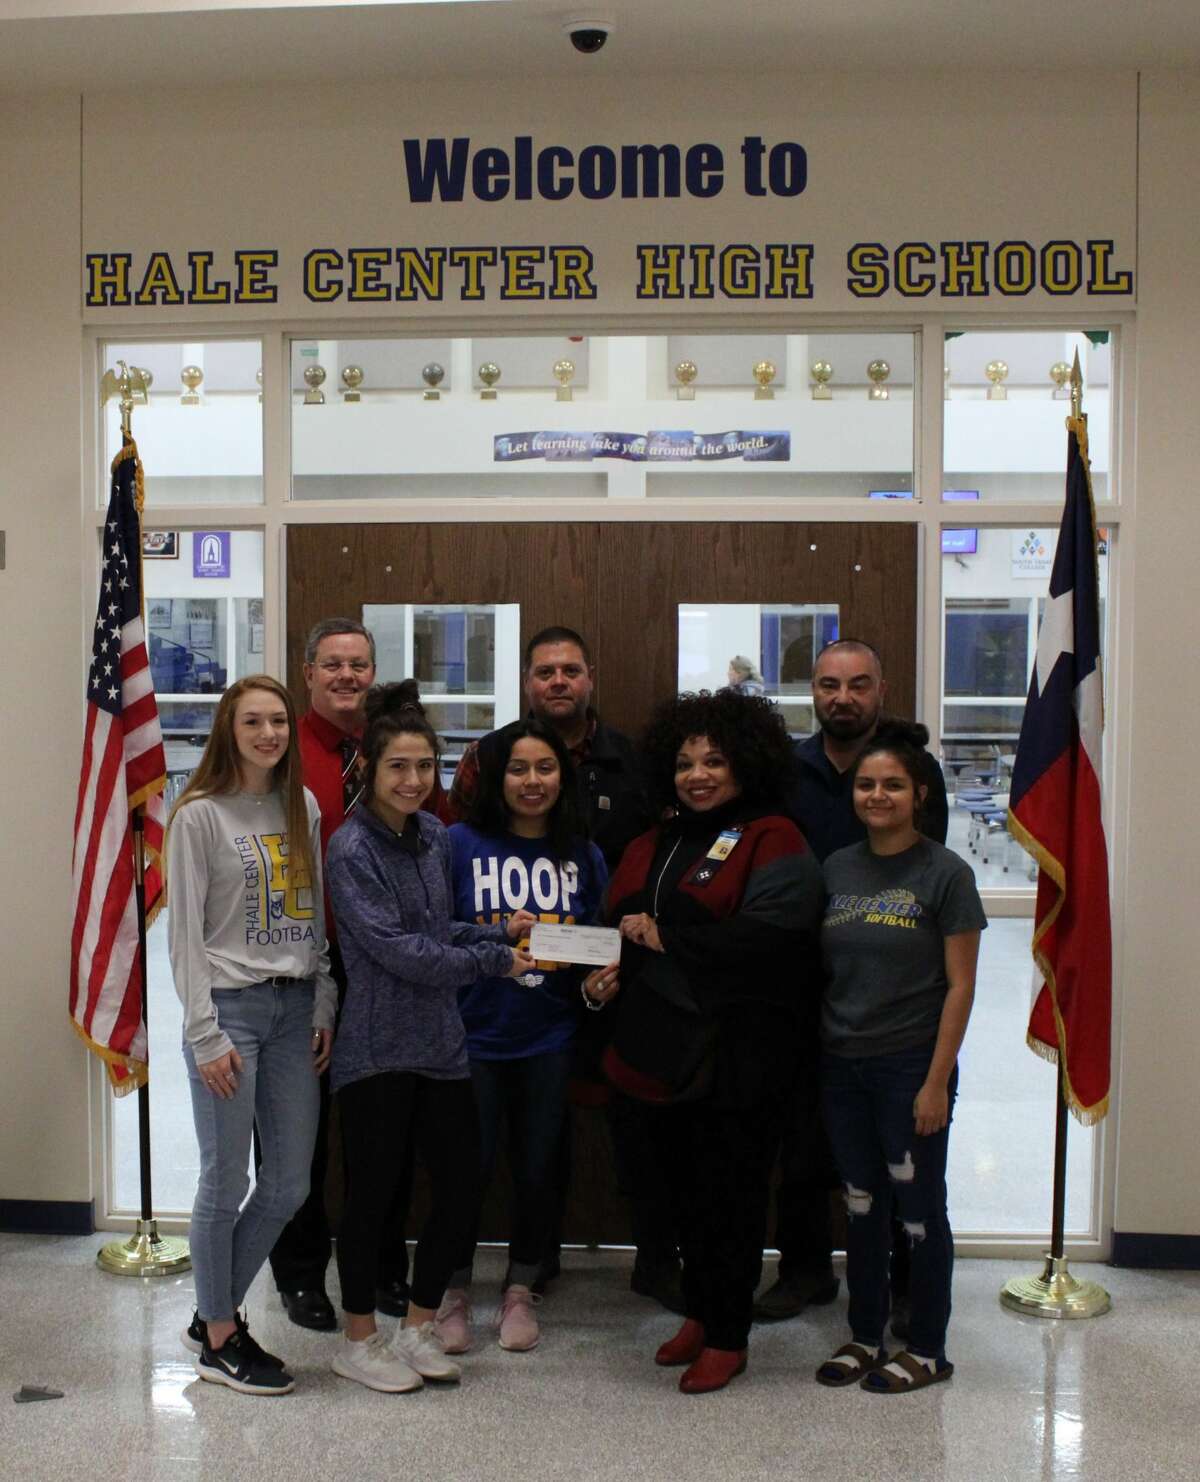 Members of the Walmart Transportation team in Plainview present a $2,000 donation to Hale Center ISD on Jan. 15. The funds were collected through the company’s Miles For Education fundraiser. Pictured: (front row) Katy Huffhines, Avery Aleman, Vanessa Calderon, general transportation manager Tonya Morris, and Jessica Rodriguez; (back row) Hale Center High School principal Carlon Branson, Walmart shop operations manager Matthew Lopez, safety operations manager Troy Valdivia